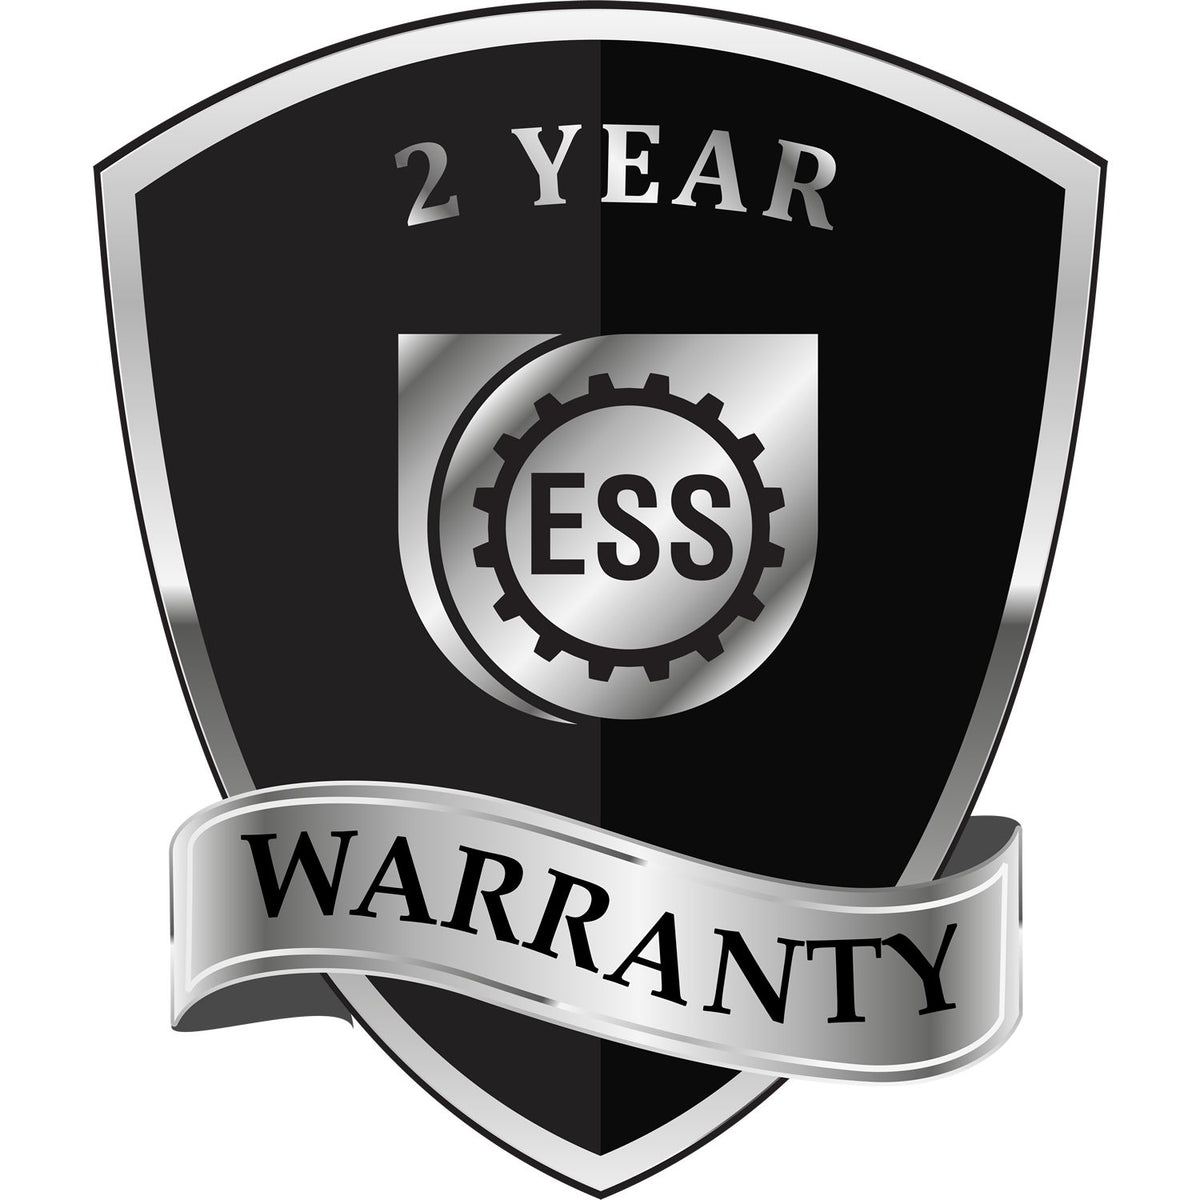 A badge or emblem showing a warranty icon for the State of Indiana Architectural Seal Embosser